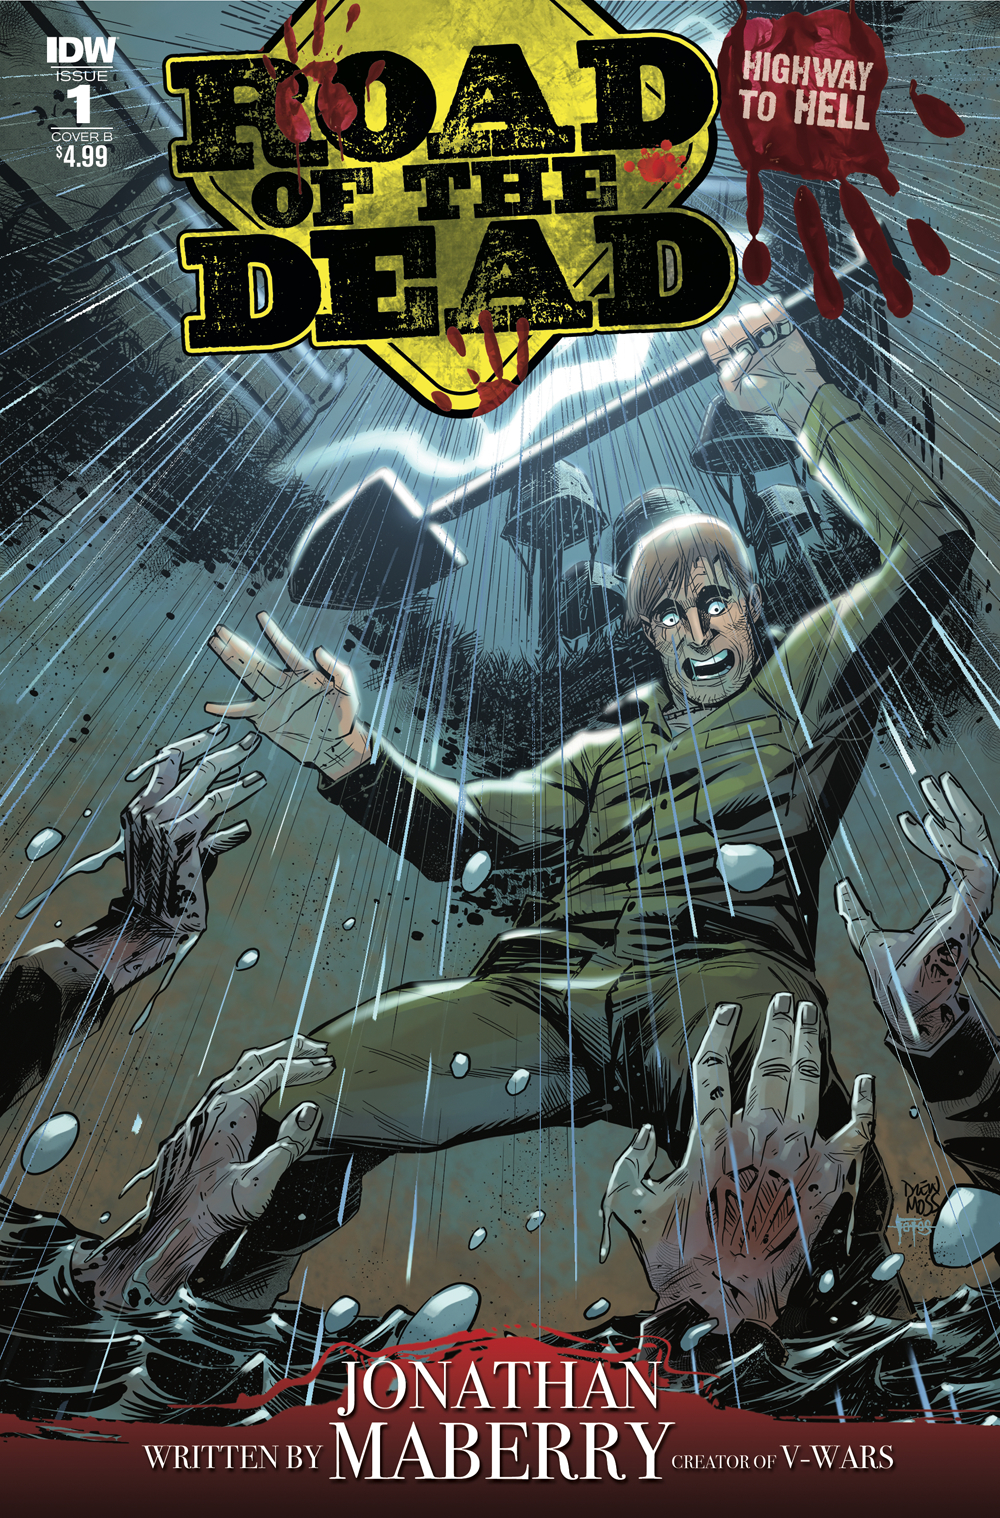 ROAD OF THE DEAD HIGHWAY TO HELL #1 CVR B MOSS